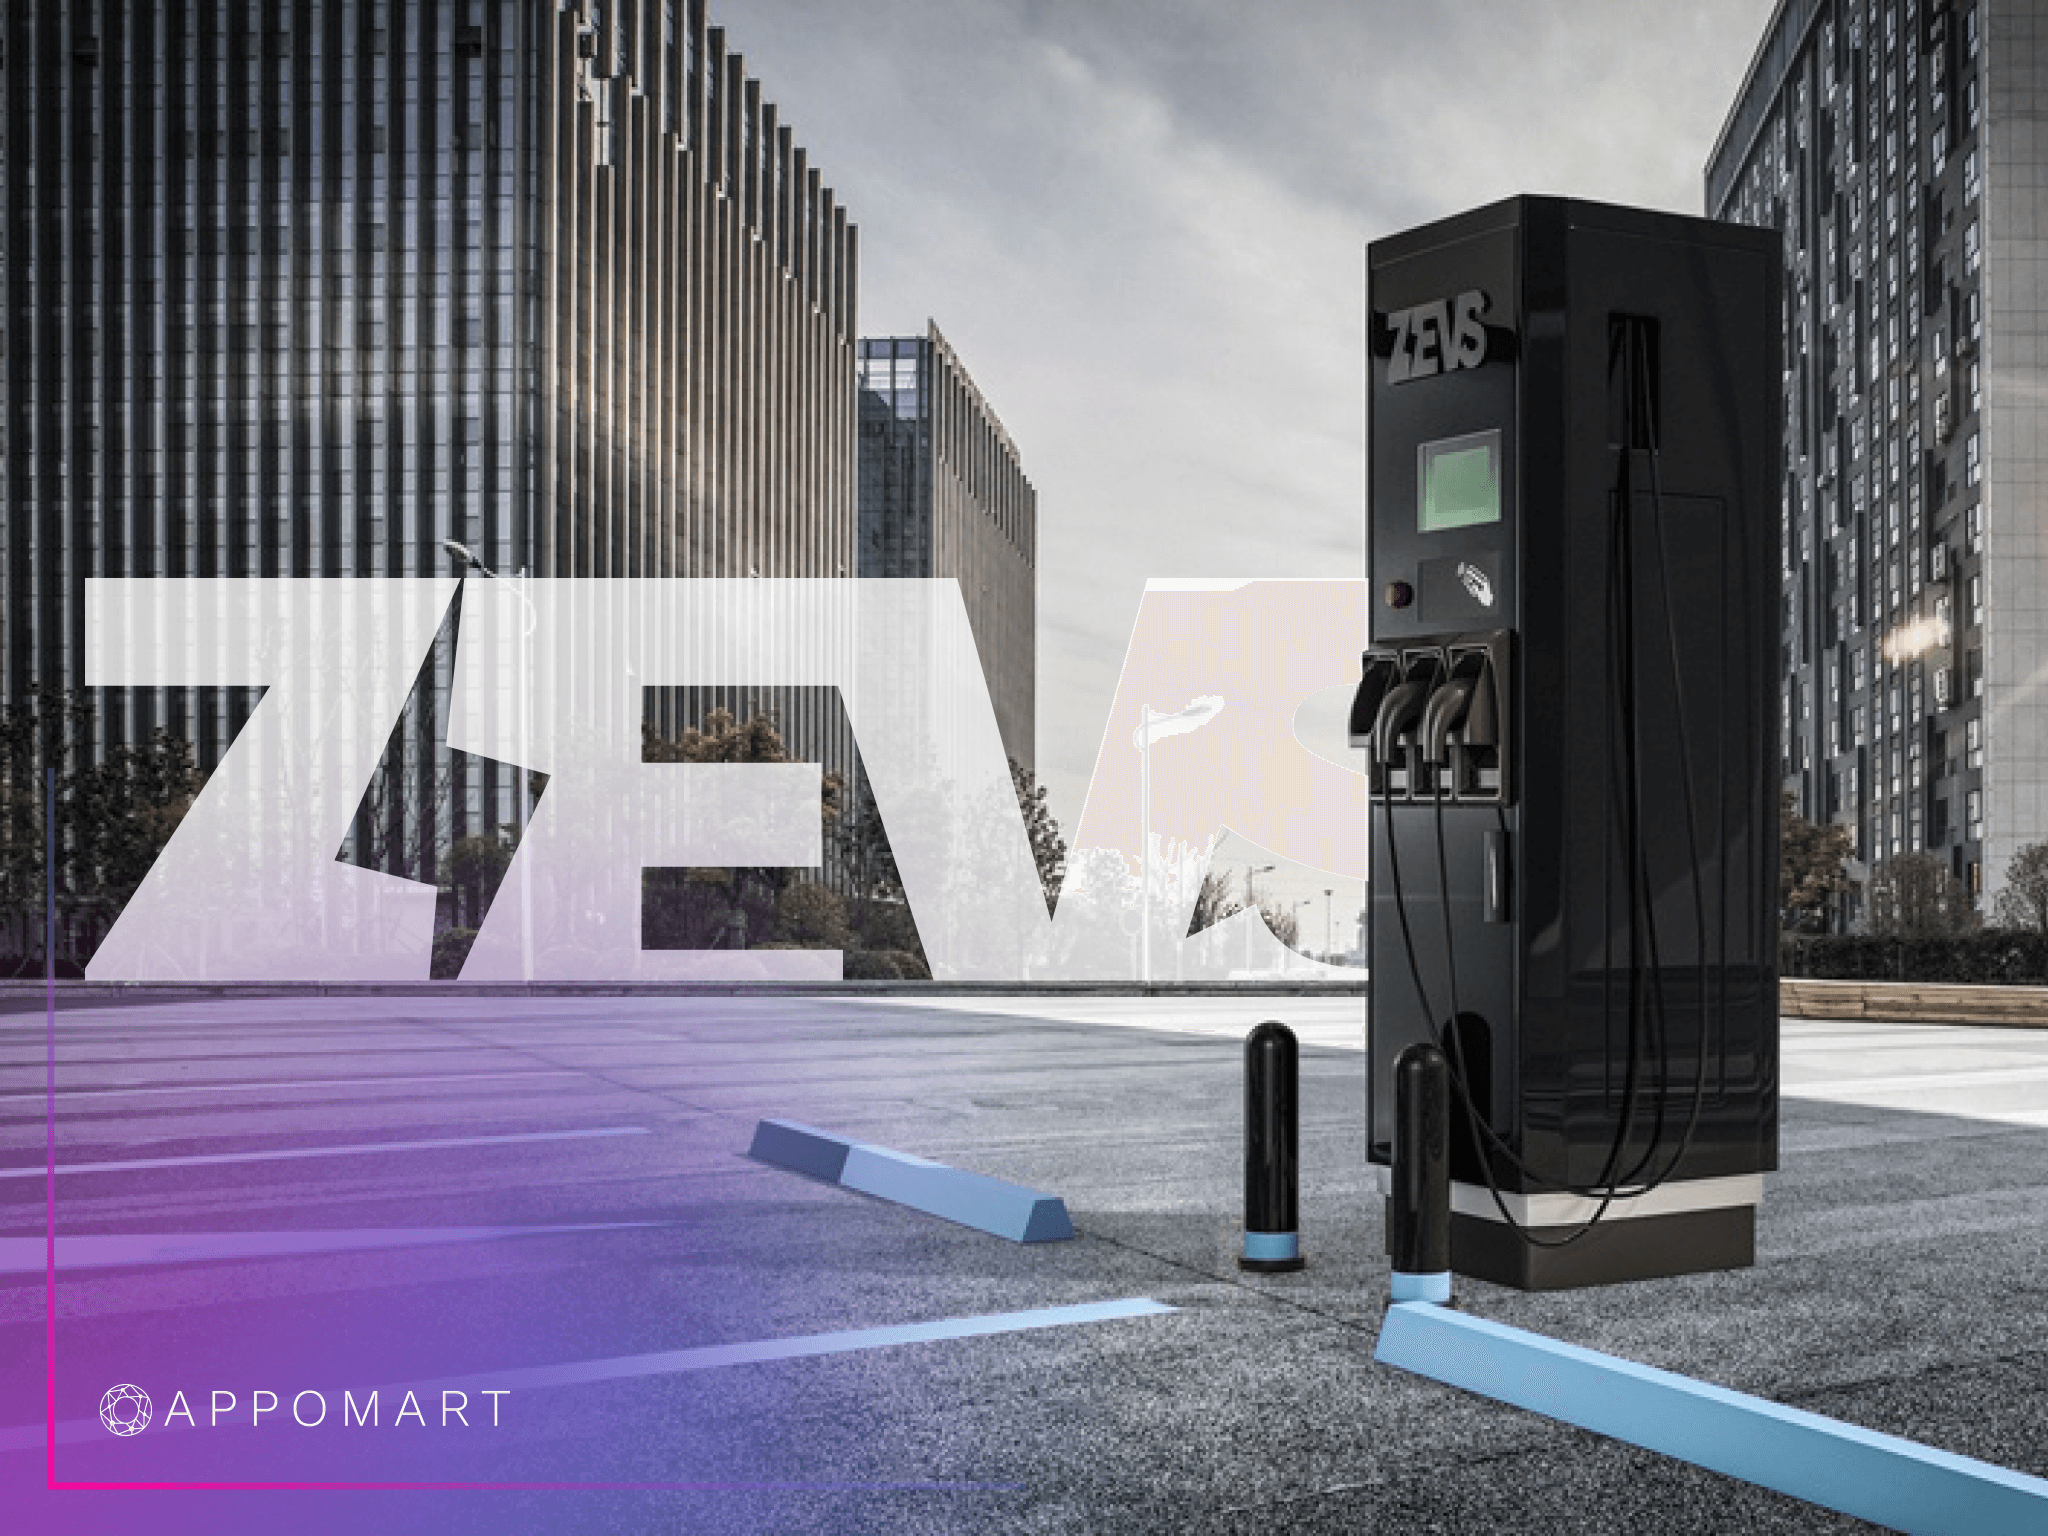 We are delighted to participate in the update of the ZEVS application, which simplifies and enhances the process of charging electric vehicles with clean energy.